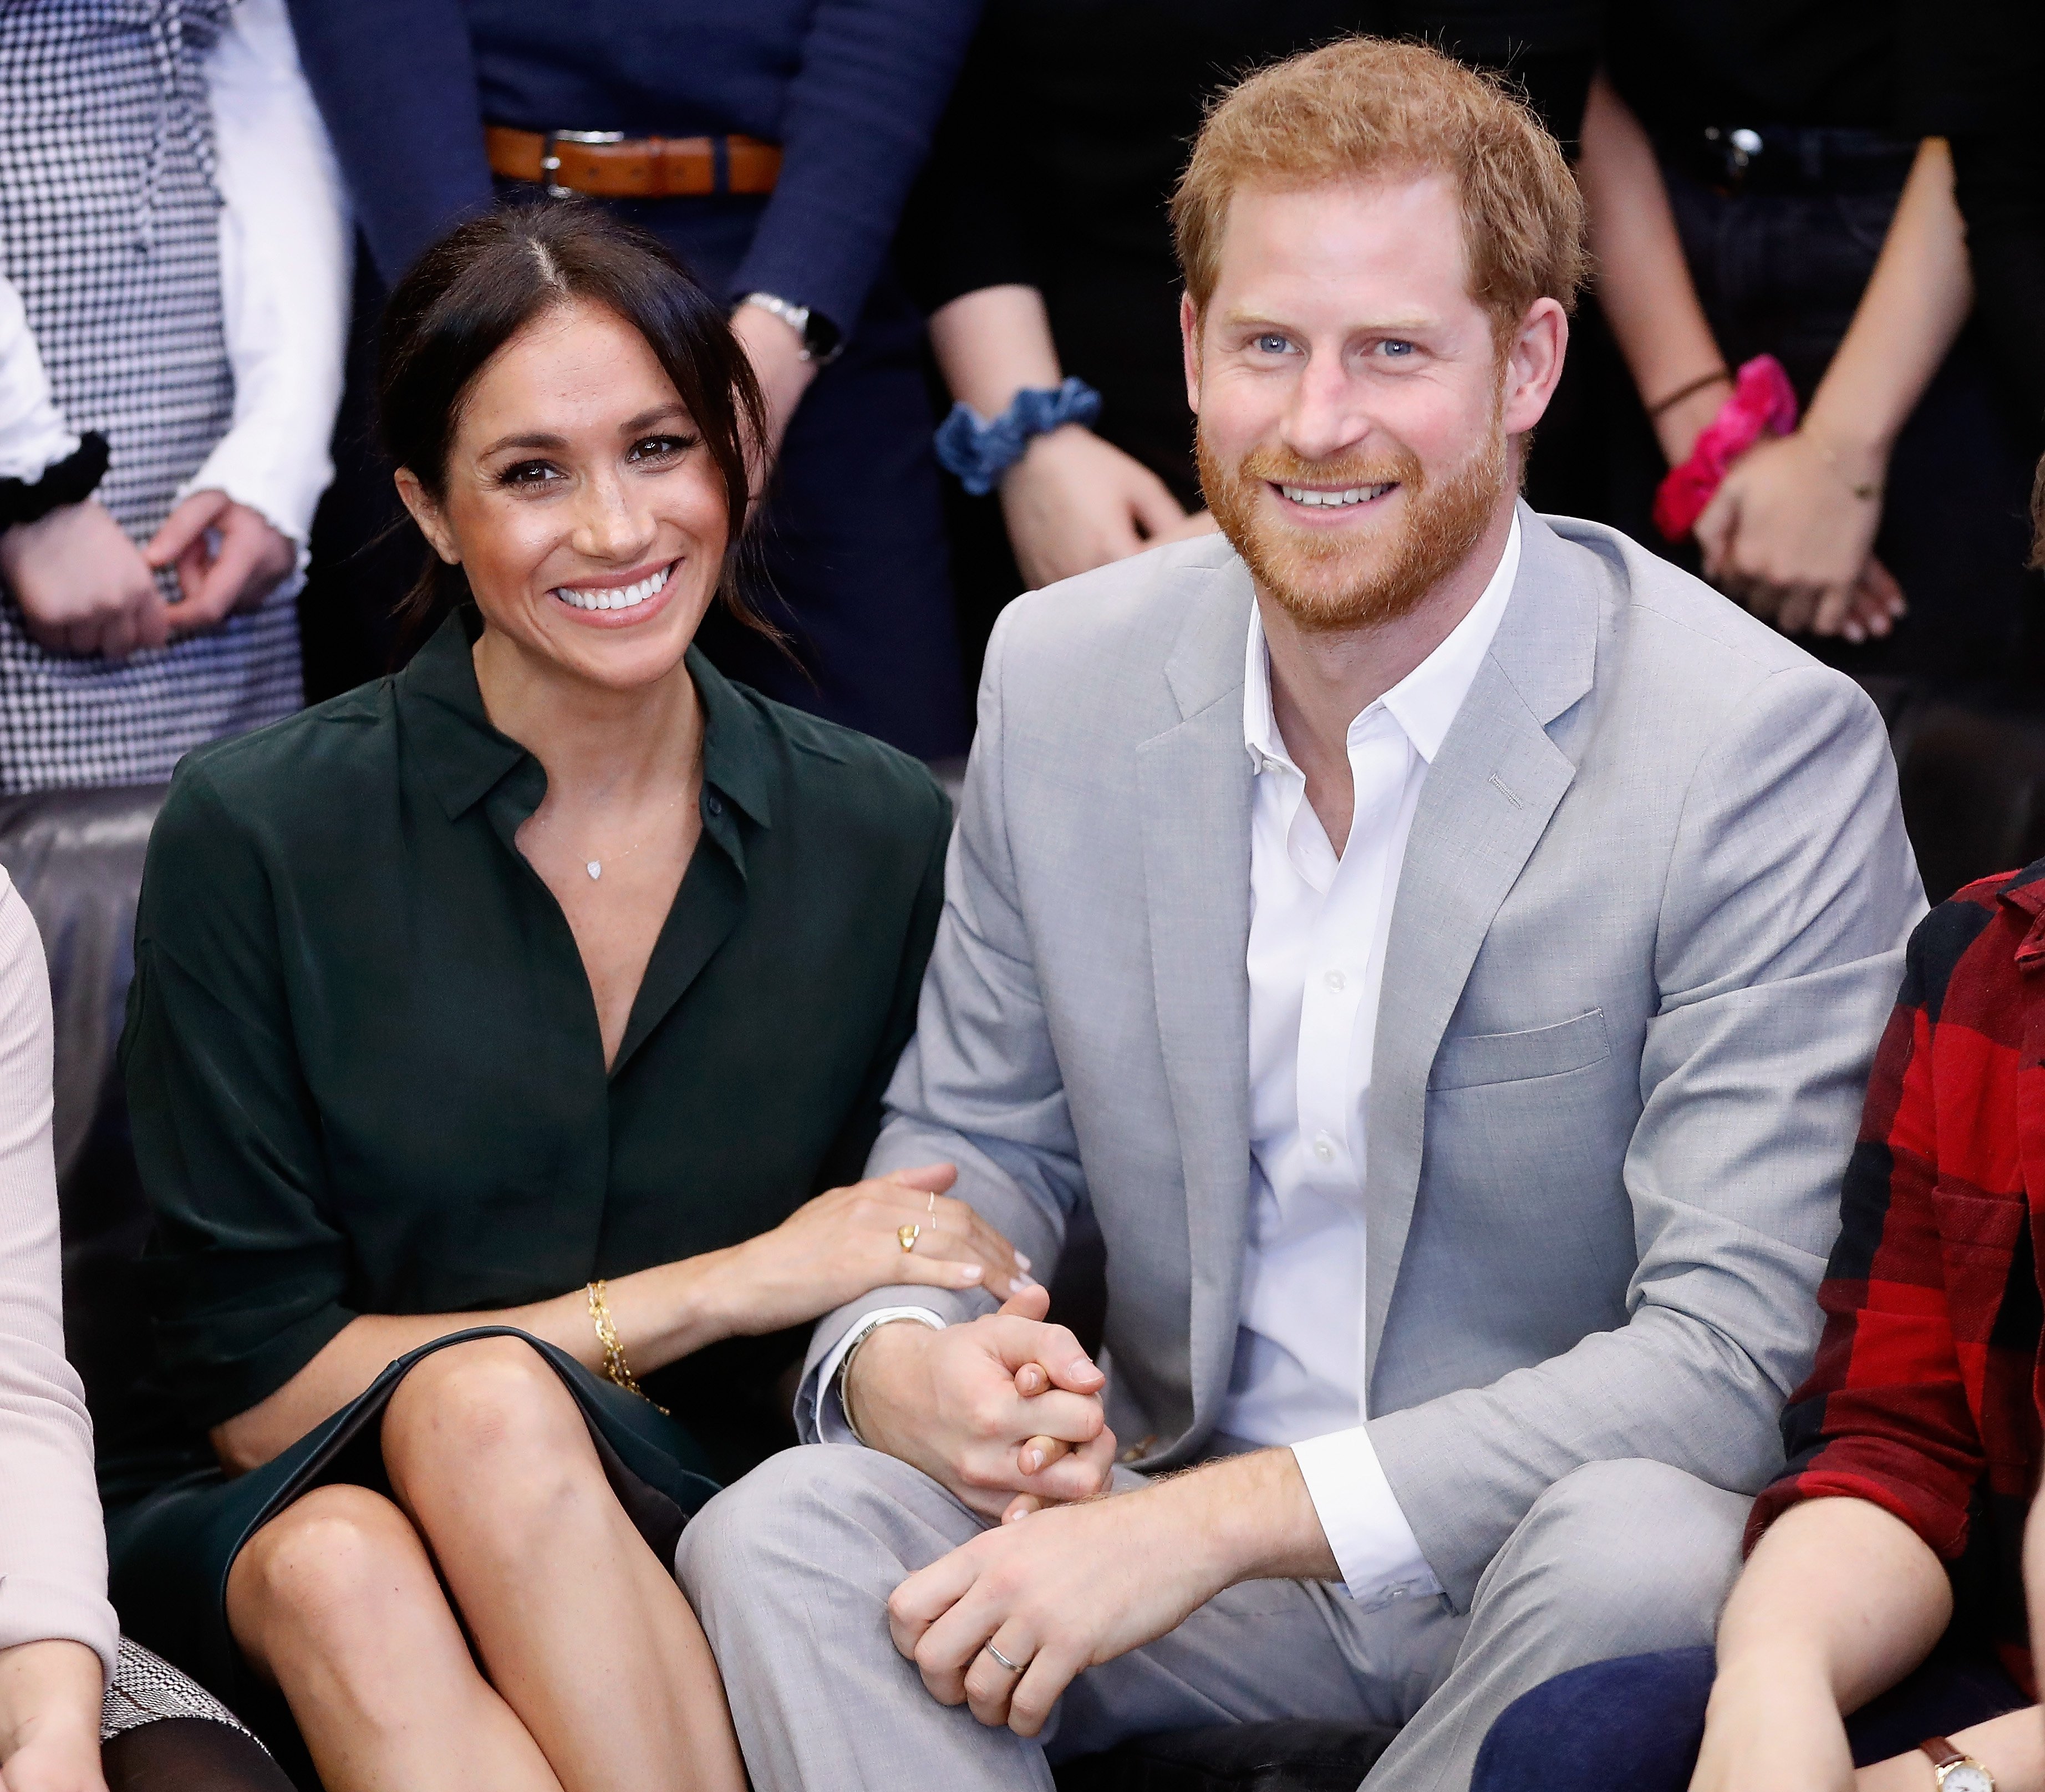 Meghan, Duchess of Sussex and Prince Harry, Duke of Sussex in Peacehaven, Sussex on October 3, 2018 in Peacehaven, United Kingdom | Source: Getty Images